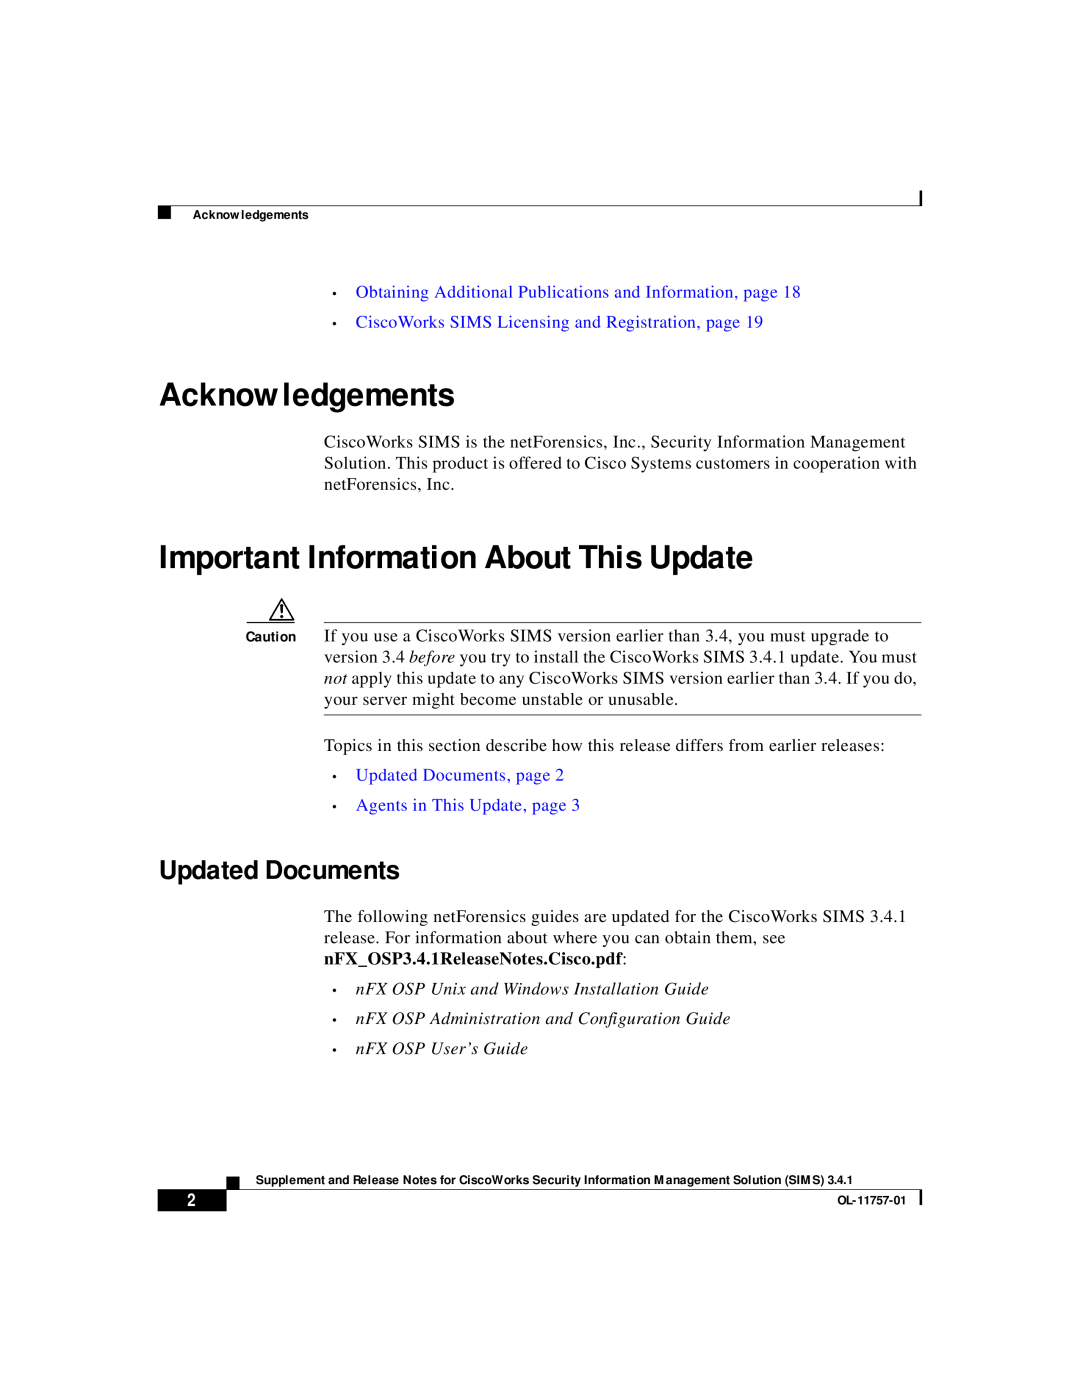 Cisco Systems OL-11757-01 manual Acknowledgements, Important Information About This Update, Updated Documents 